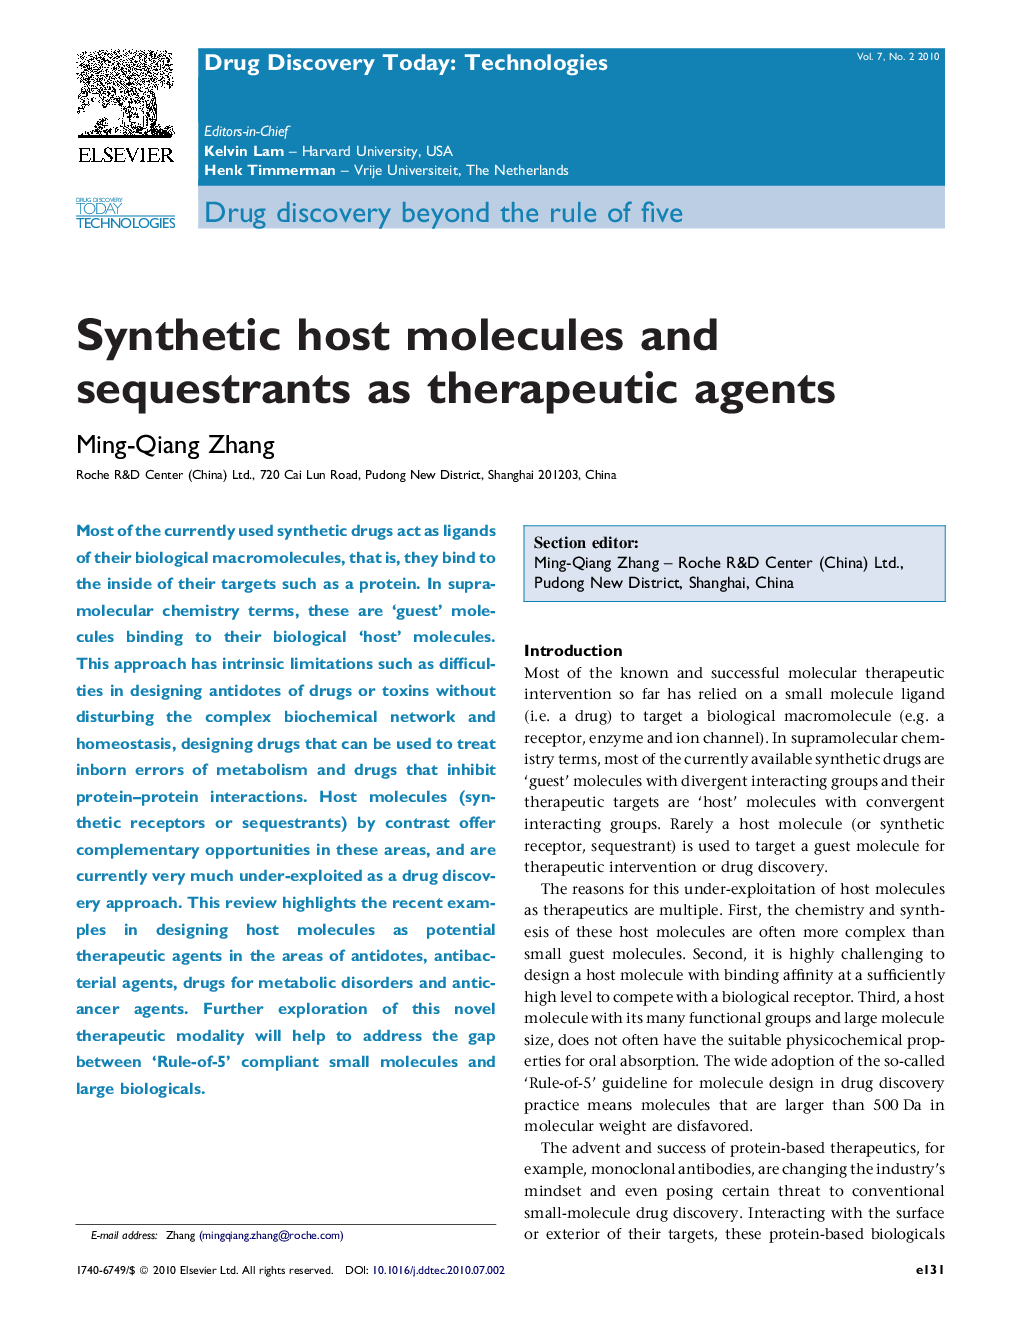 Synthetic host molecules and sequestrants as therapeutic agents